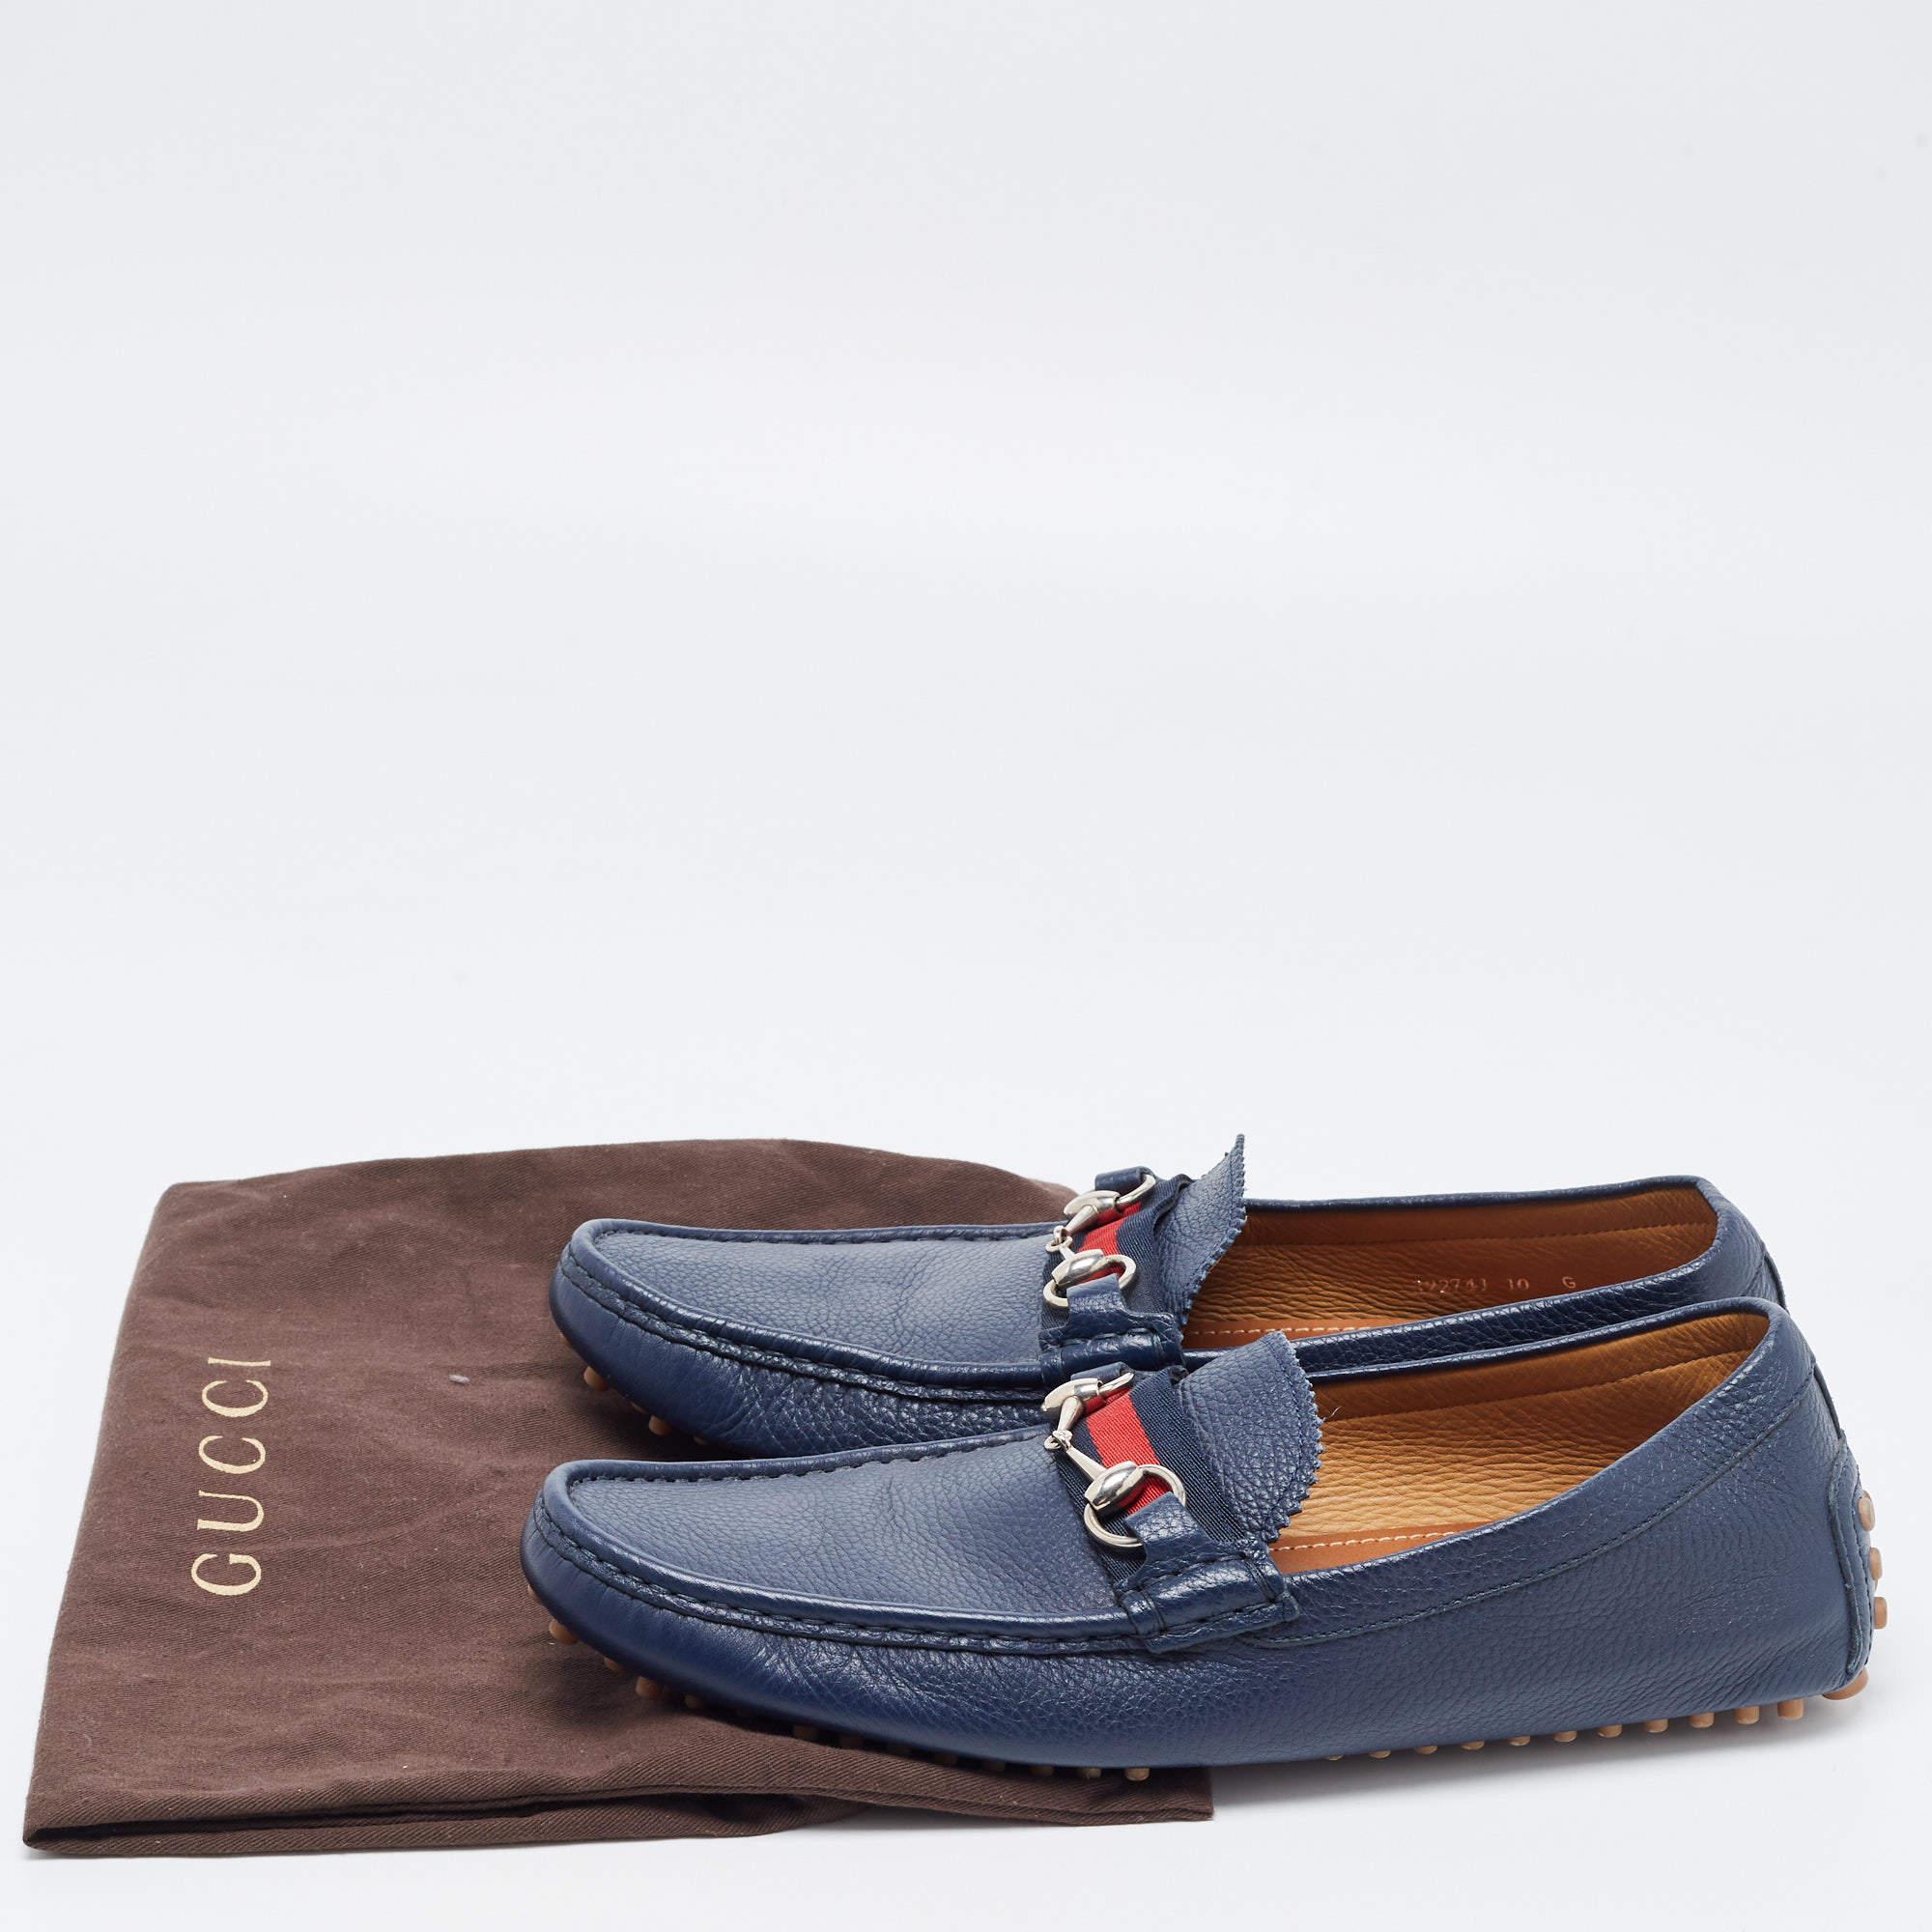 Gucci Blue Leather Web Horsebit Detail Slip On Loafers Size 44 4